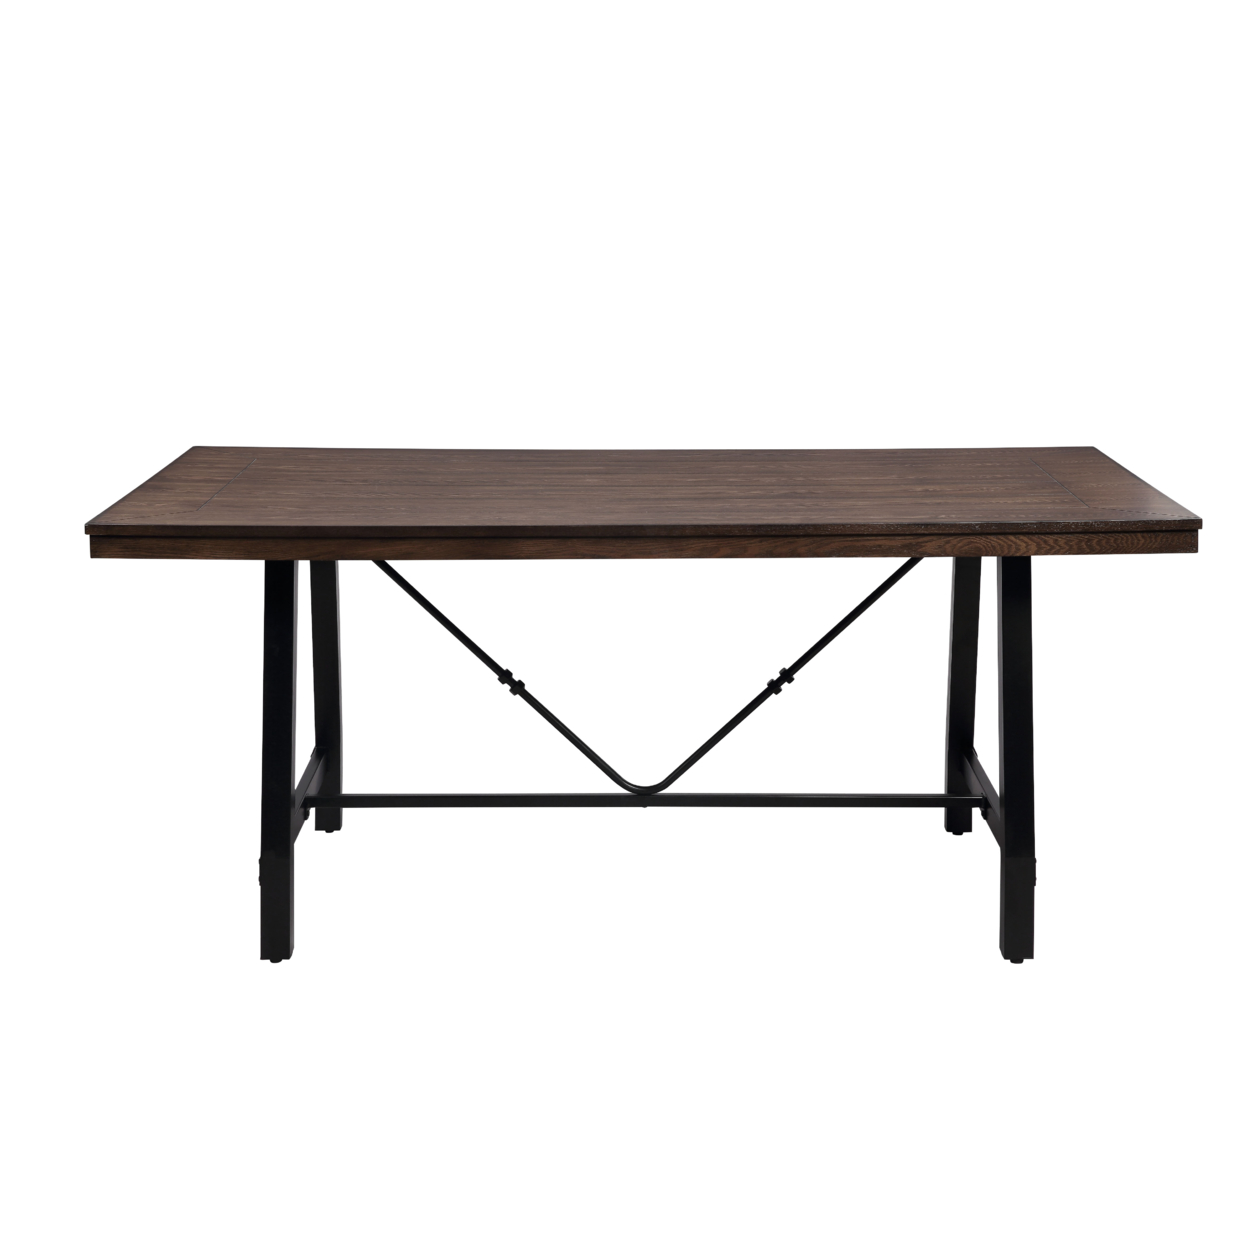 Industrial Style Wood And Metal Dining Table, Brown And Black- Saltoro Sherpi